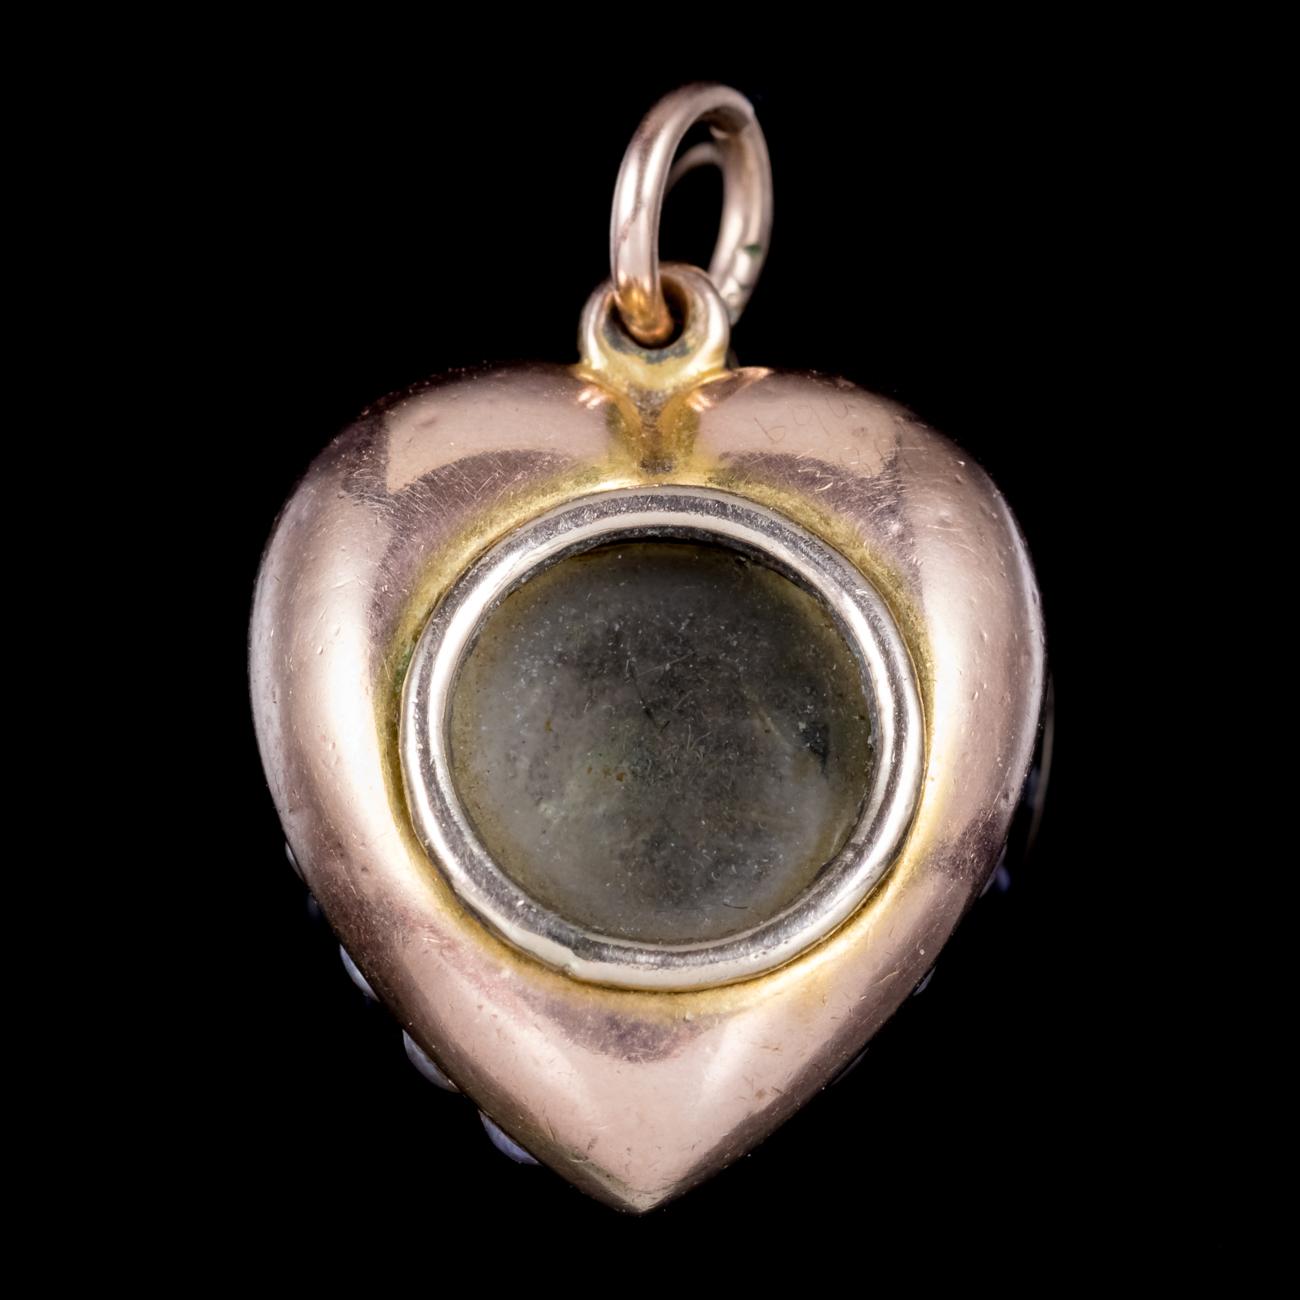 A delightful antique Victorian heart pendant decorated with borders of Pearls and Turquoise stones which graduate out from the centre. Turquoise are a lovely opaque stone with a calming blue/ green colour that was considered a symbol of friendship